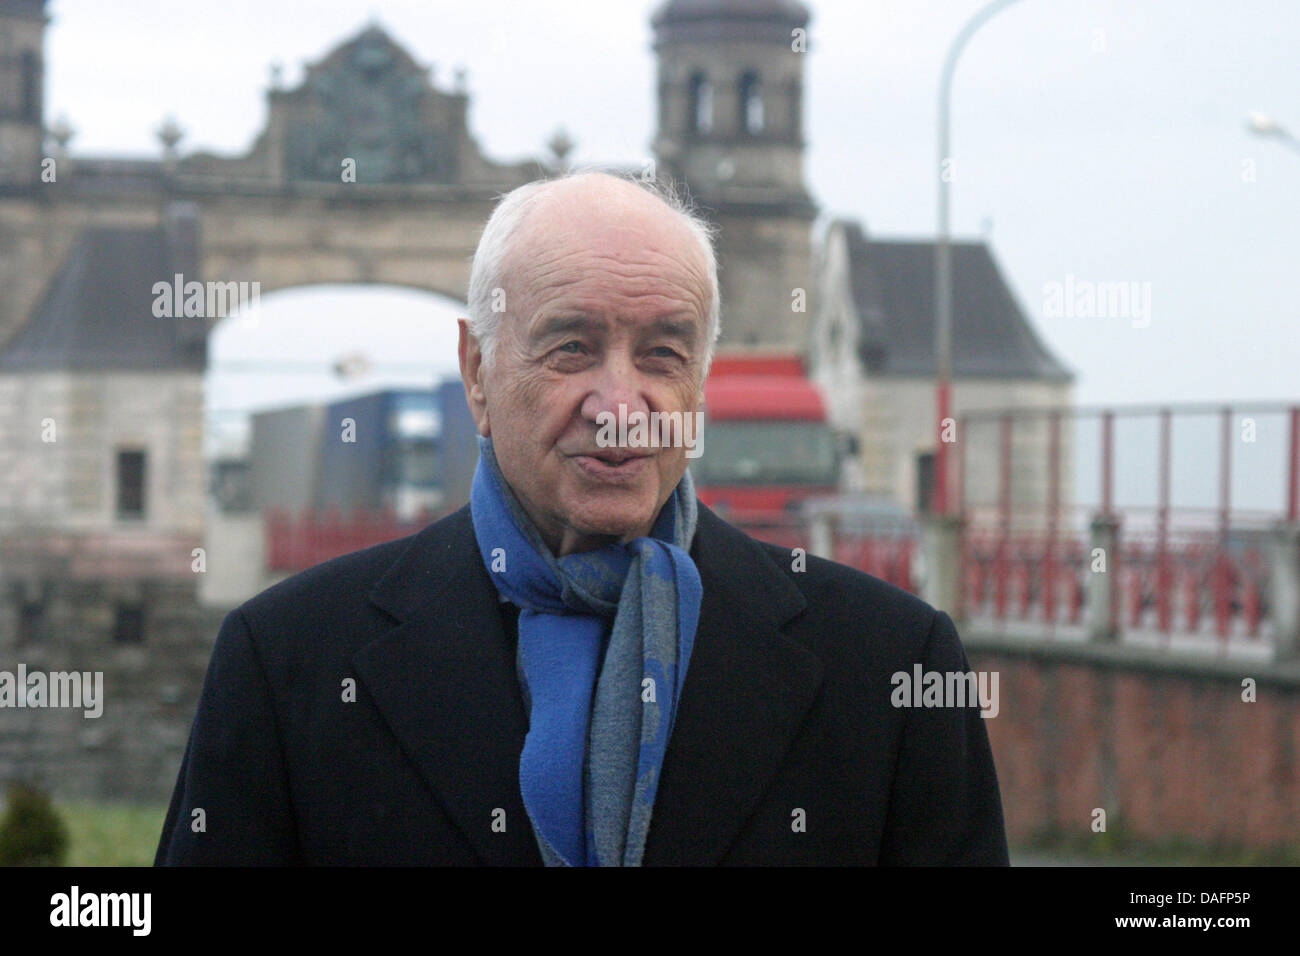 German actor Armin Mueller-Stahl stands in front of the Queen Louise bridge in his city of birth 'Tilsit', named Sovetsk today, situated in the Russian federal district Kaliningrad, Russia, 07 December 2011. The artist and actor visited the city for the first time in 73 years to receive an award as honorary citizen of the town on 07 December 2011. Photo: Thoralf Plath Stock Photo